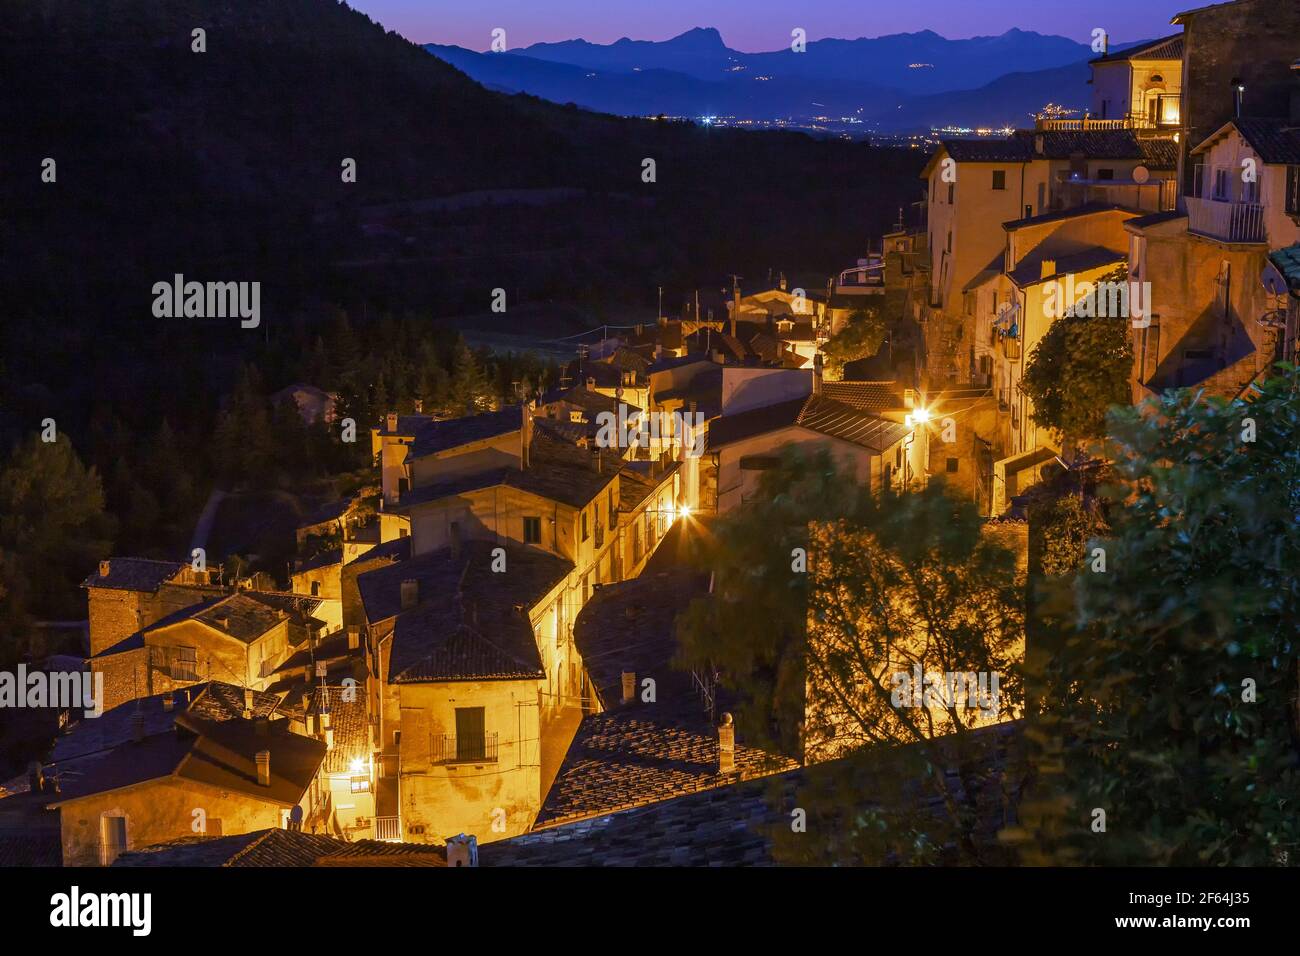 Evening panorama of a village in the mountains illuminated with artificial light. In the background, the Gran Sasso mountain range. Pettorano, Abruzzo Stock Photo